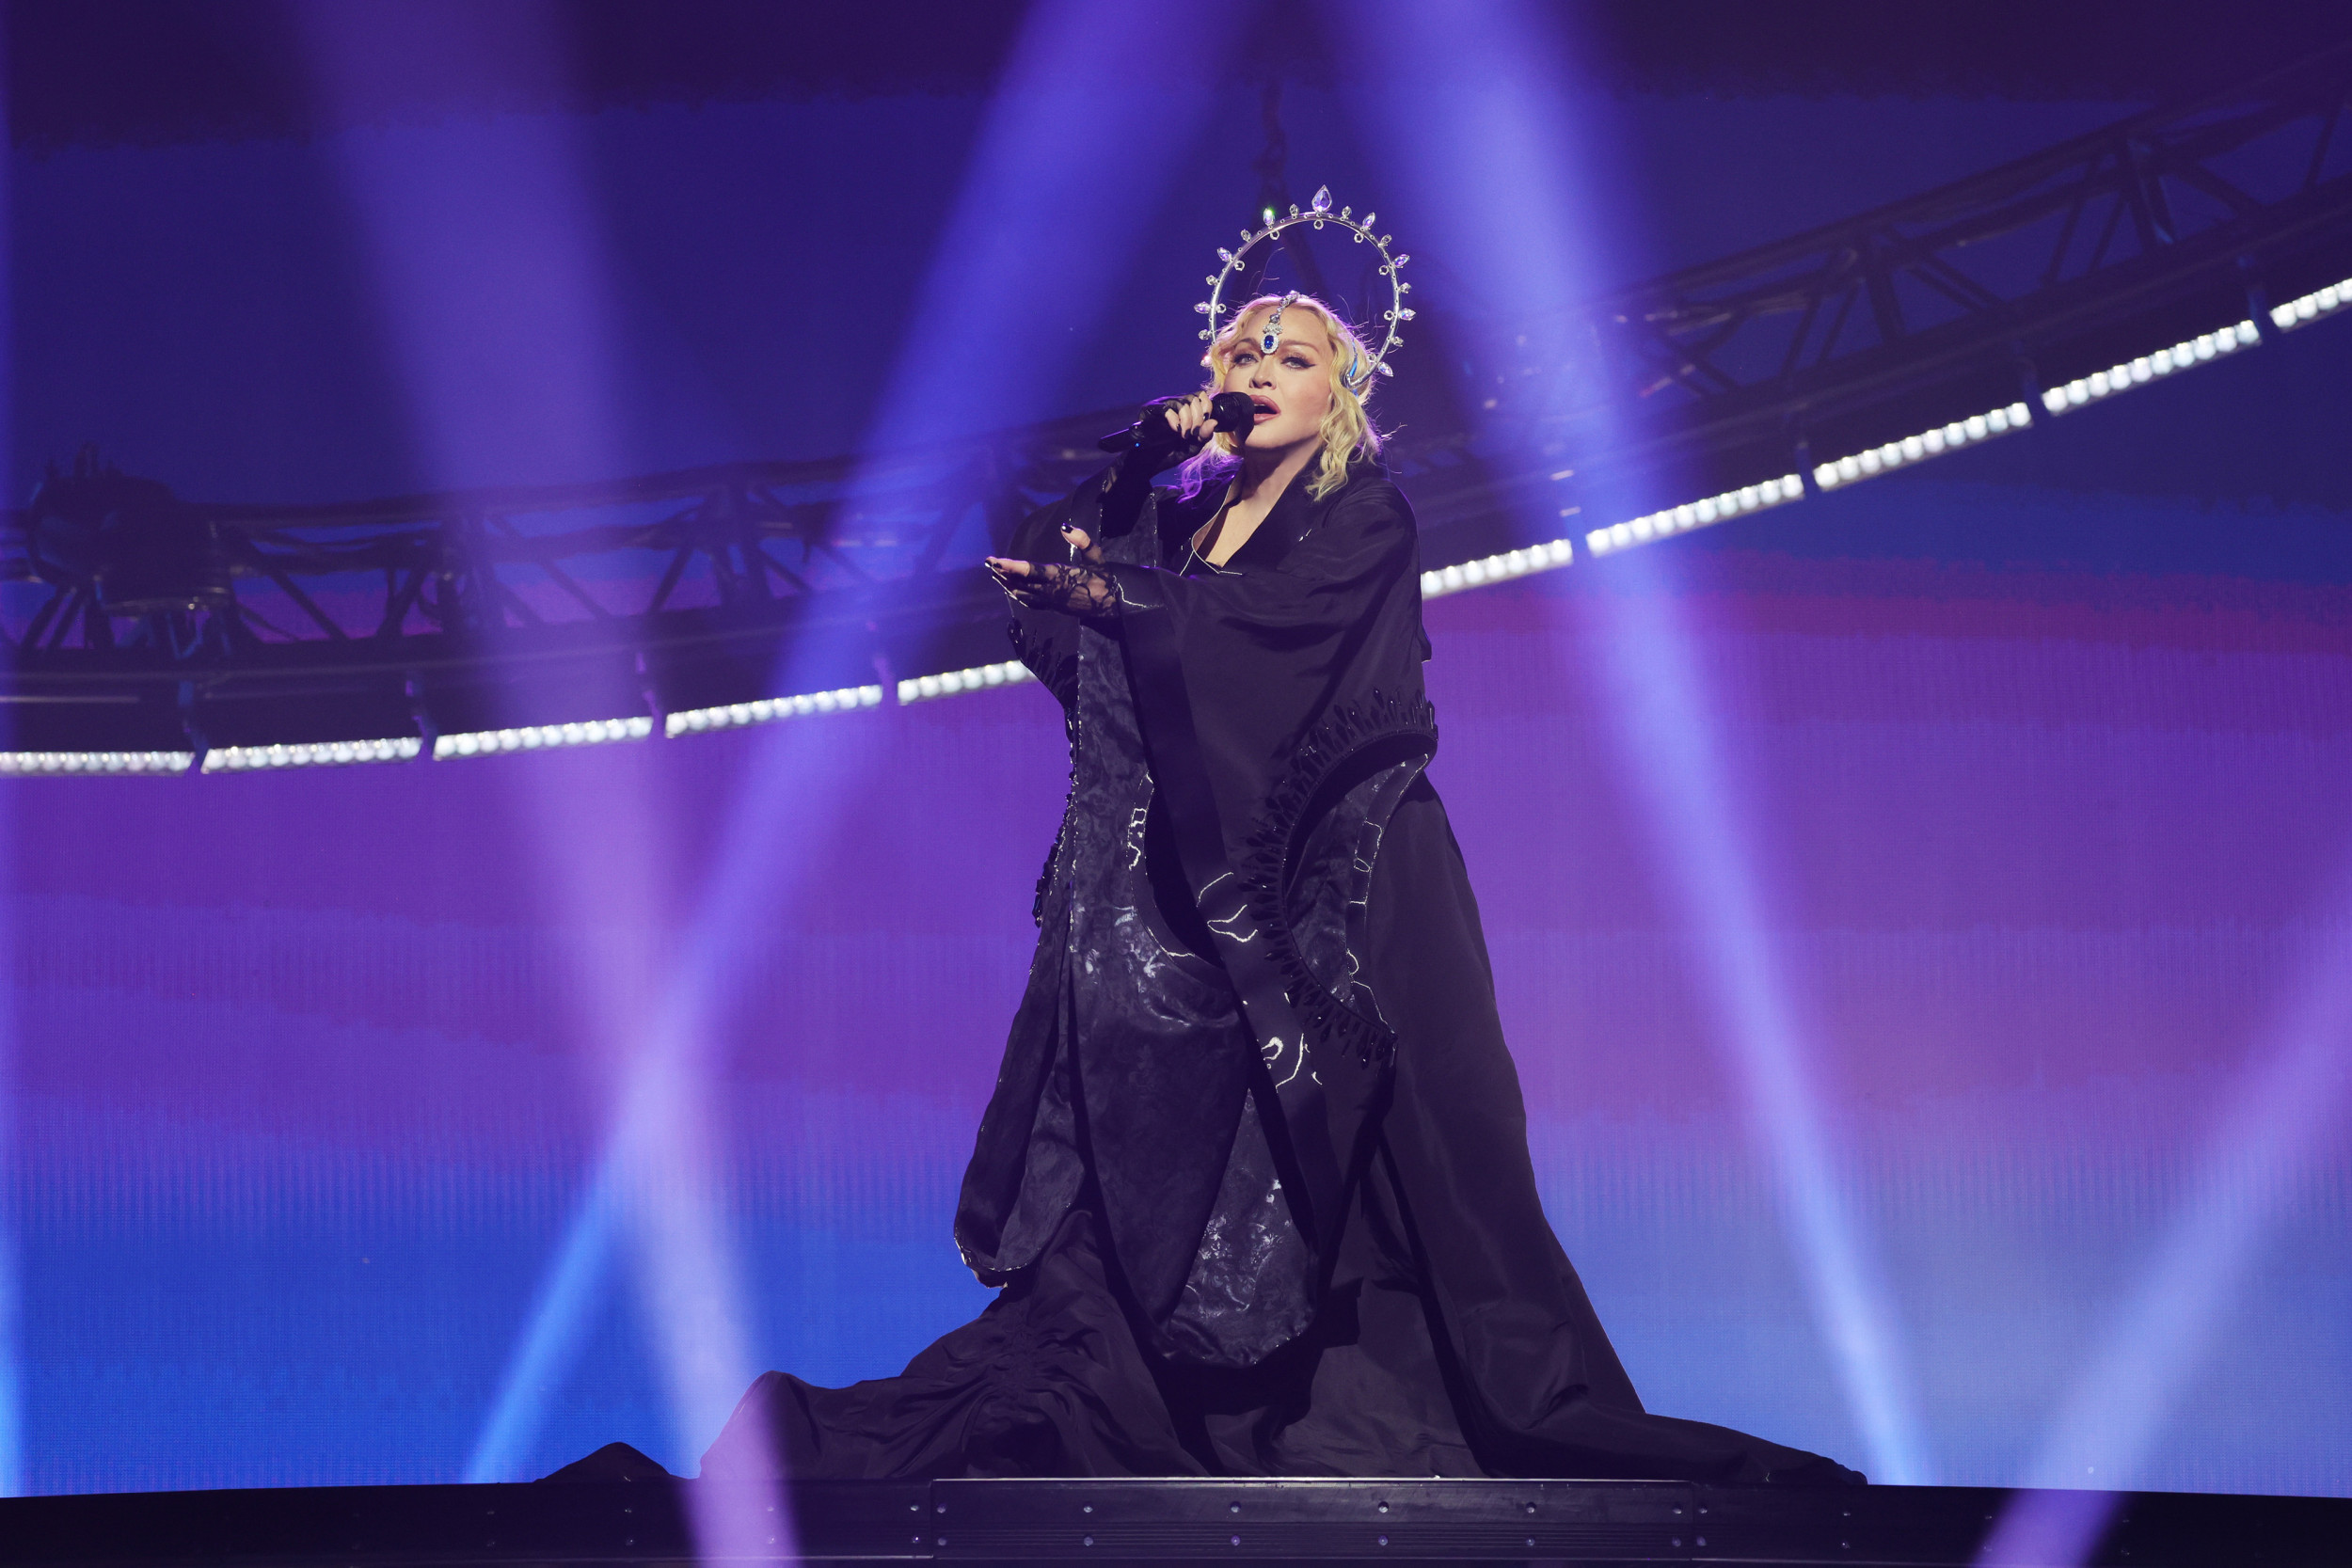 madonna-slammed-over-special-guest-at-concert-newsweek